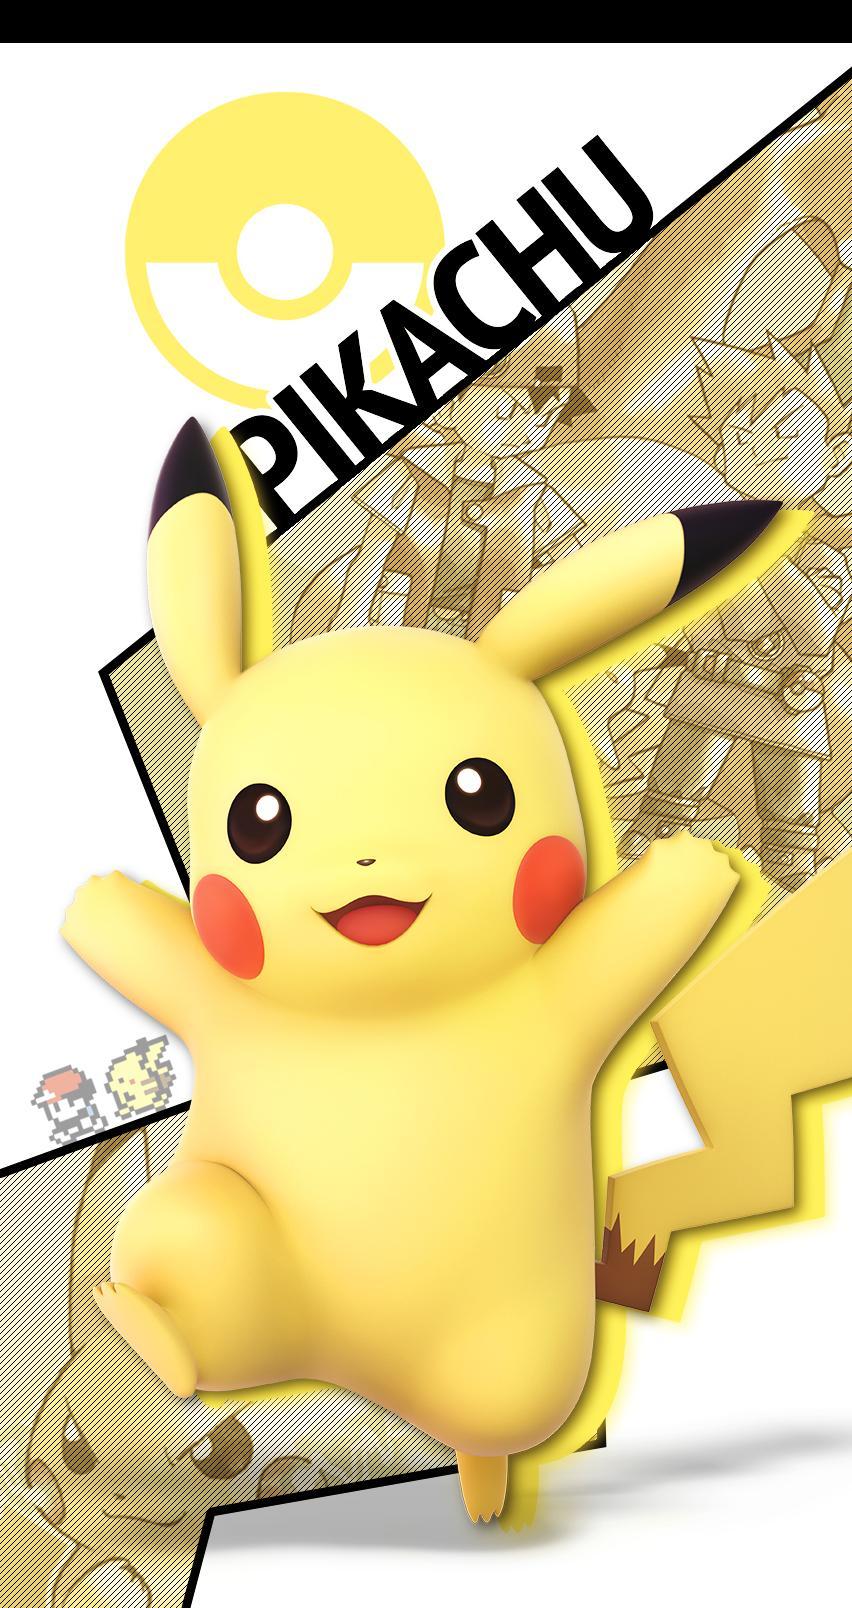 Some mobile wallpaper of Pikachu